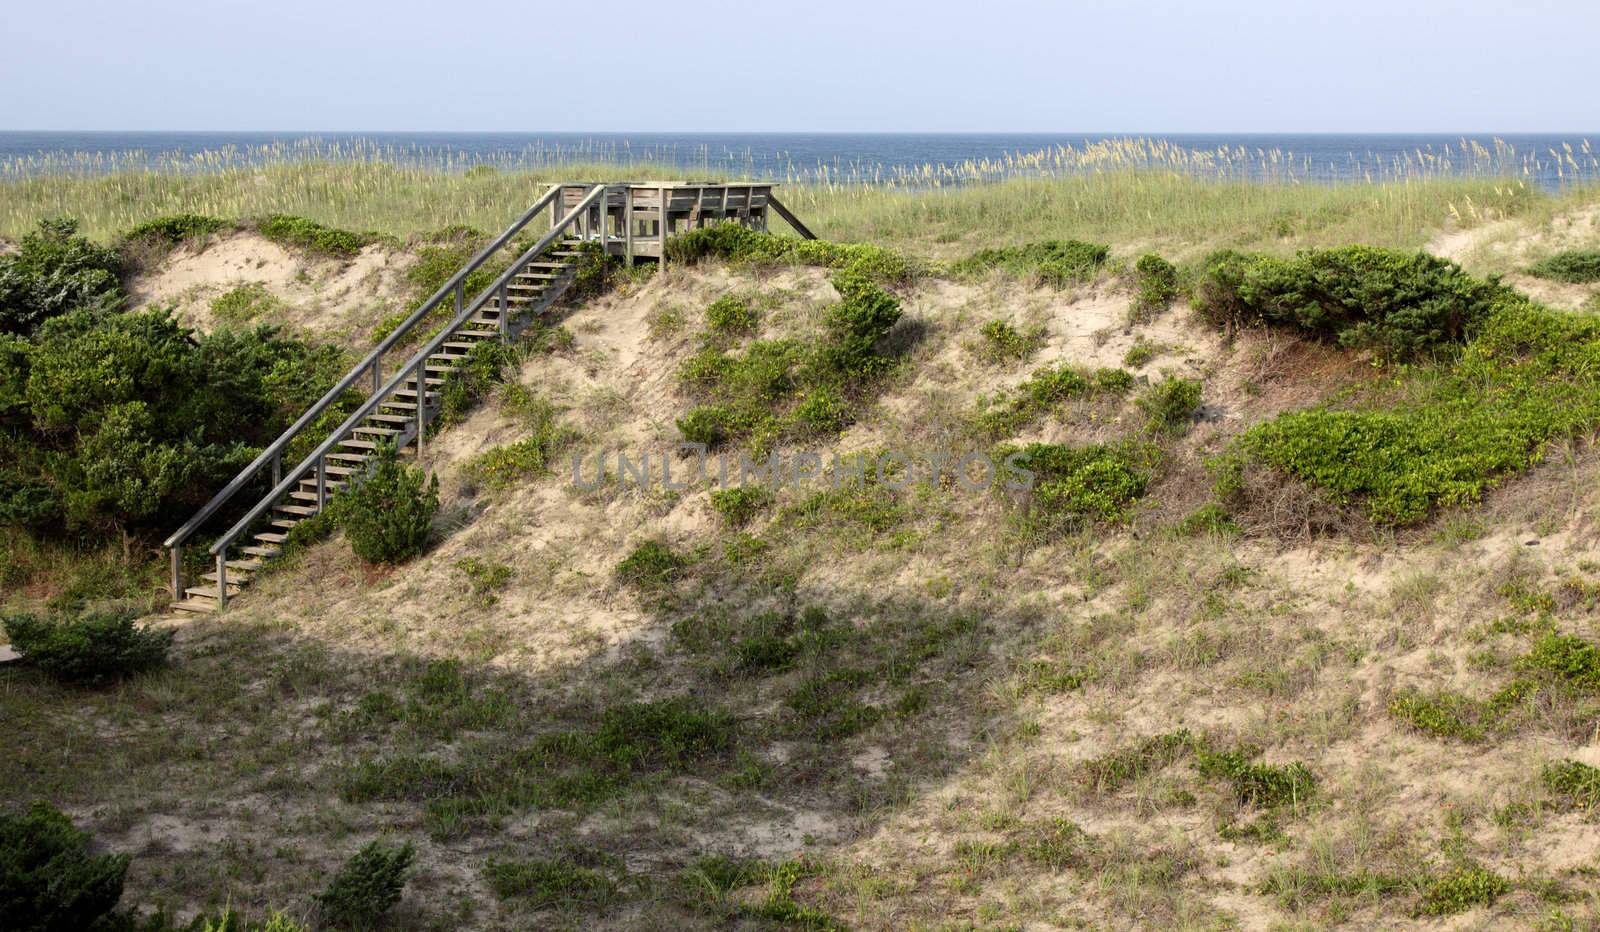 A stairway to the beach on the Outer Banks, North Carolina, USA.
